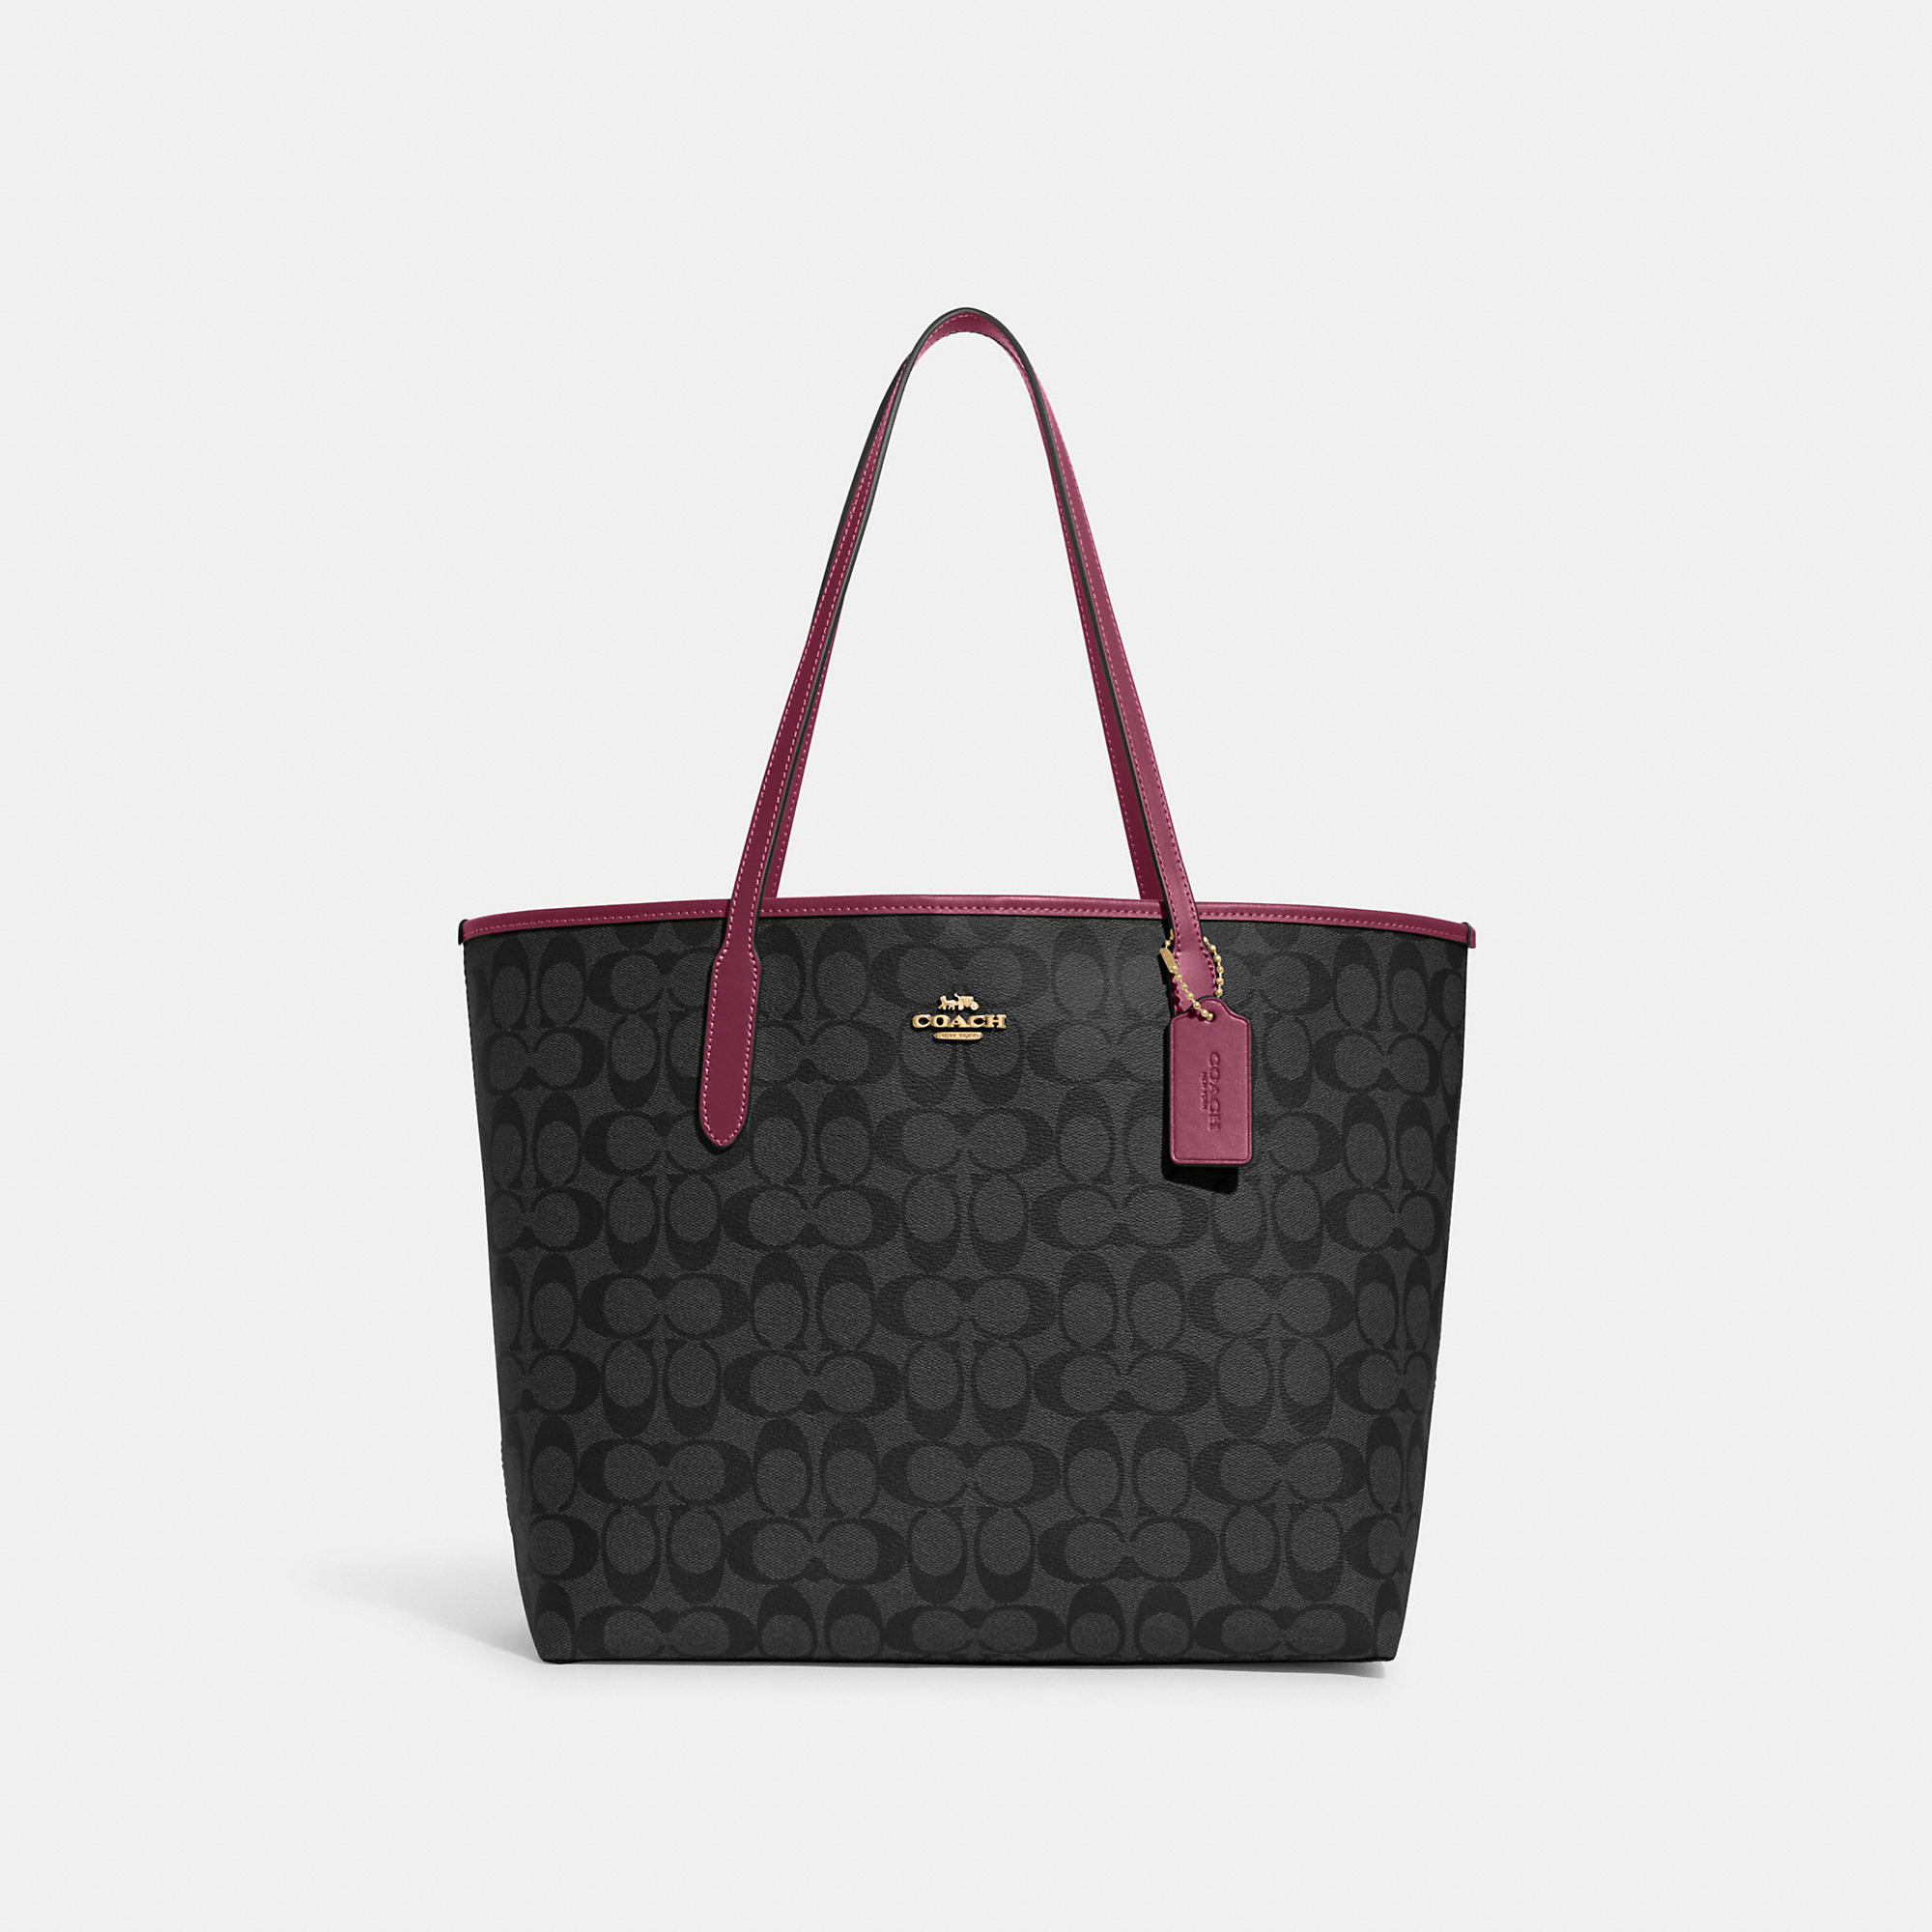 Coach Outlet City Tote In Signature Canvas - Multi